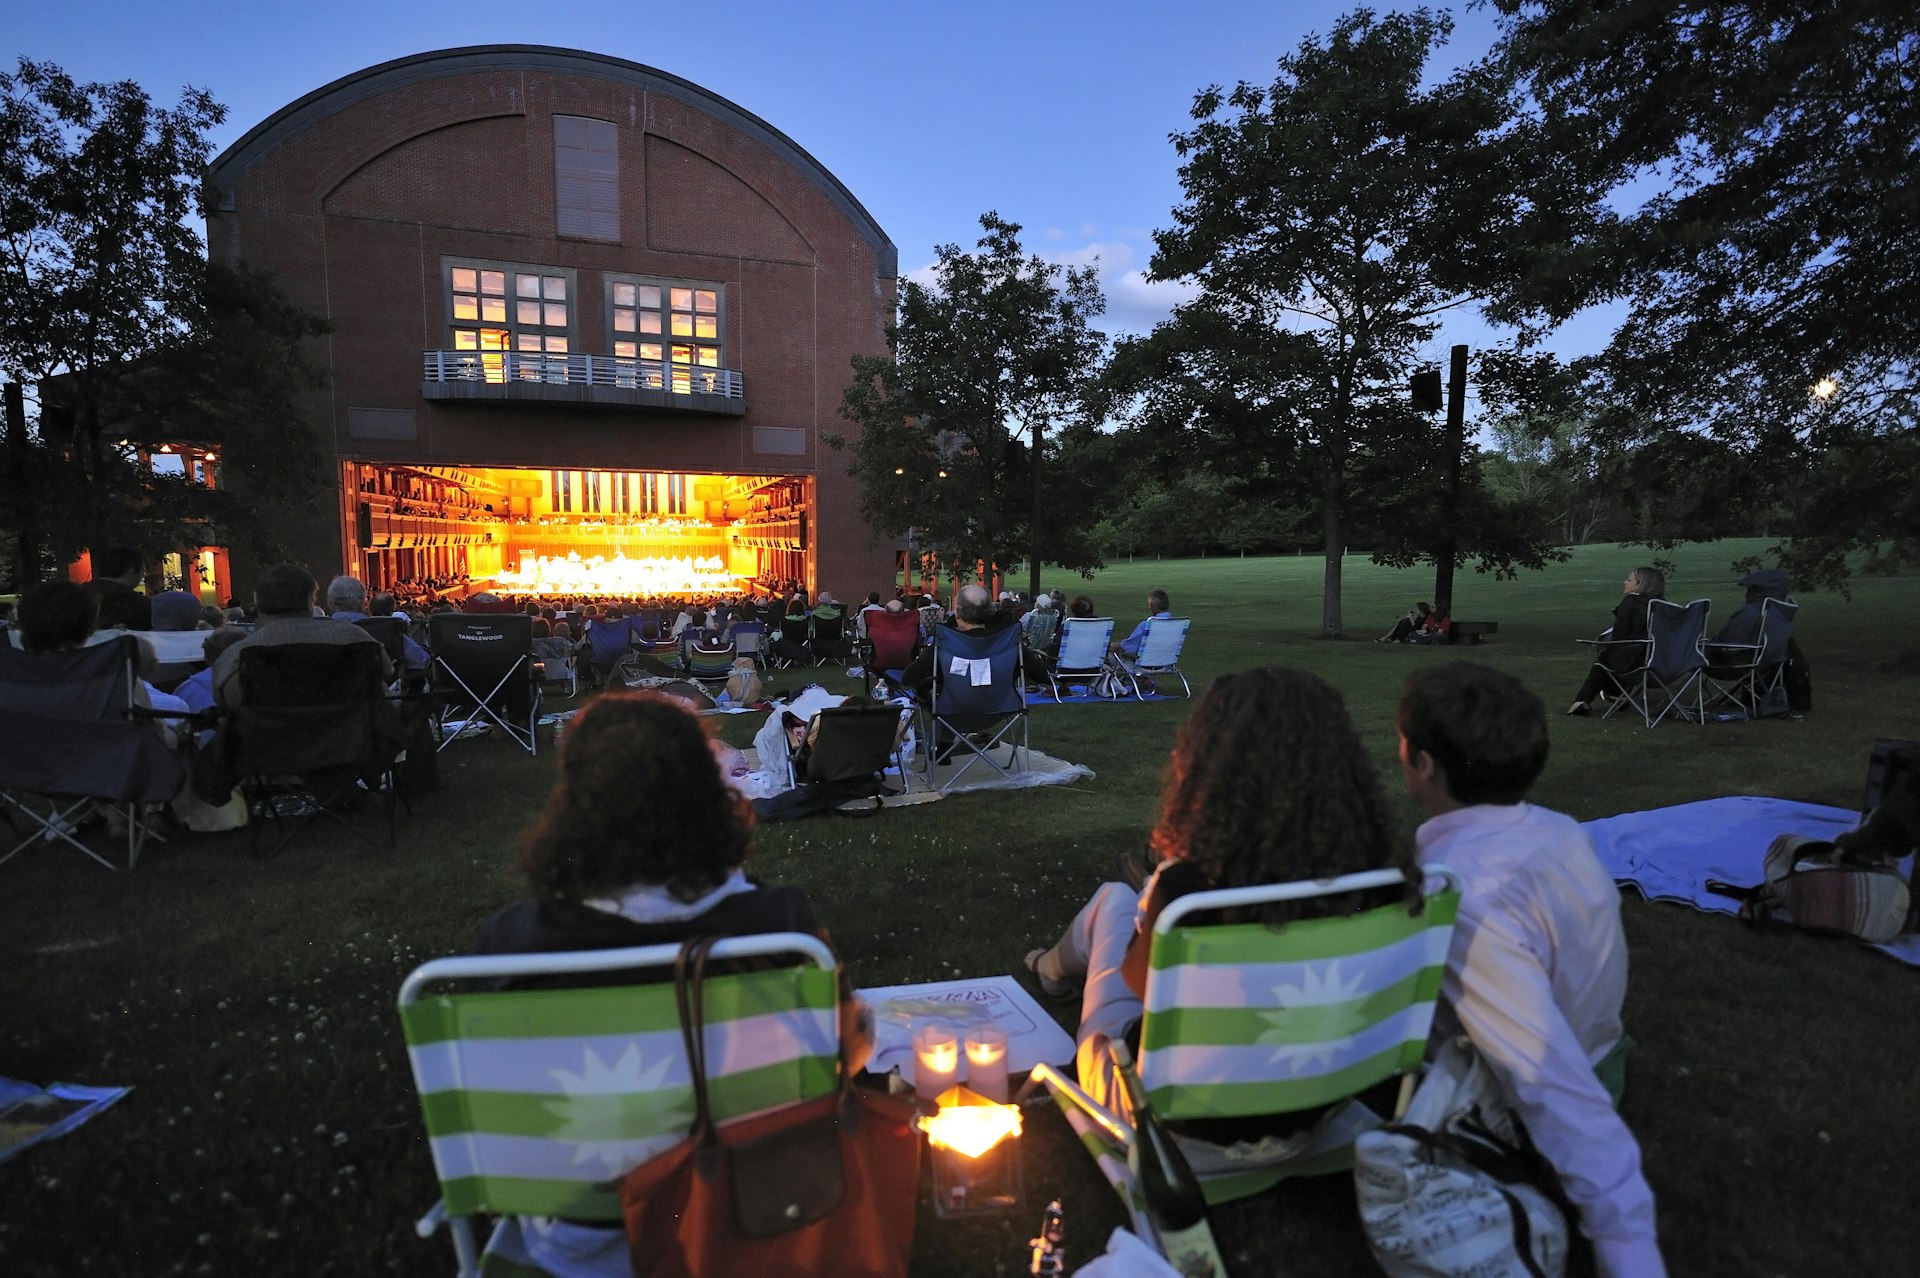 Crowds in folding chairs enjoy an open-air concert at Ozawa Hall, Tanglewood Music Festival, Berkshires, Massachusetts, USA